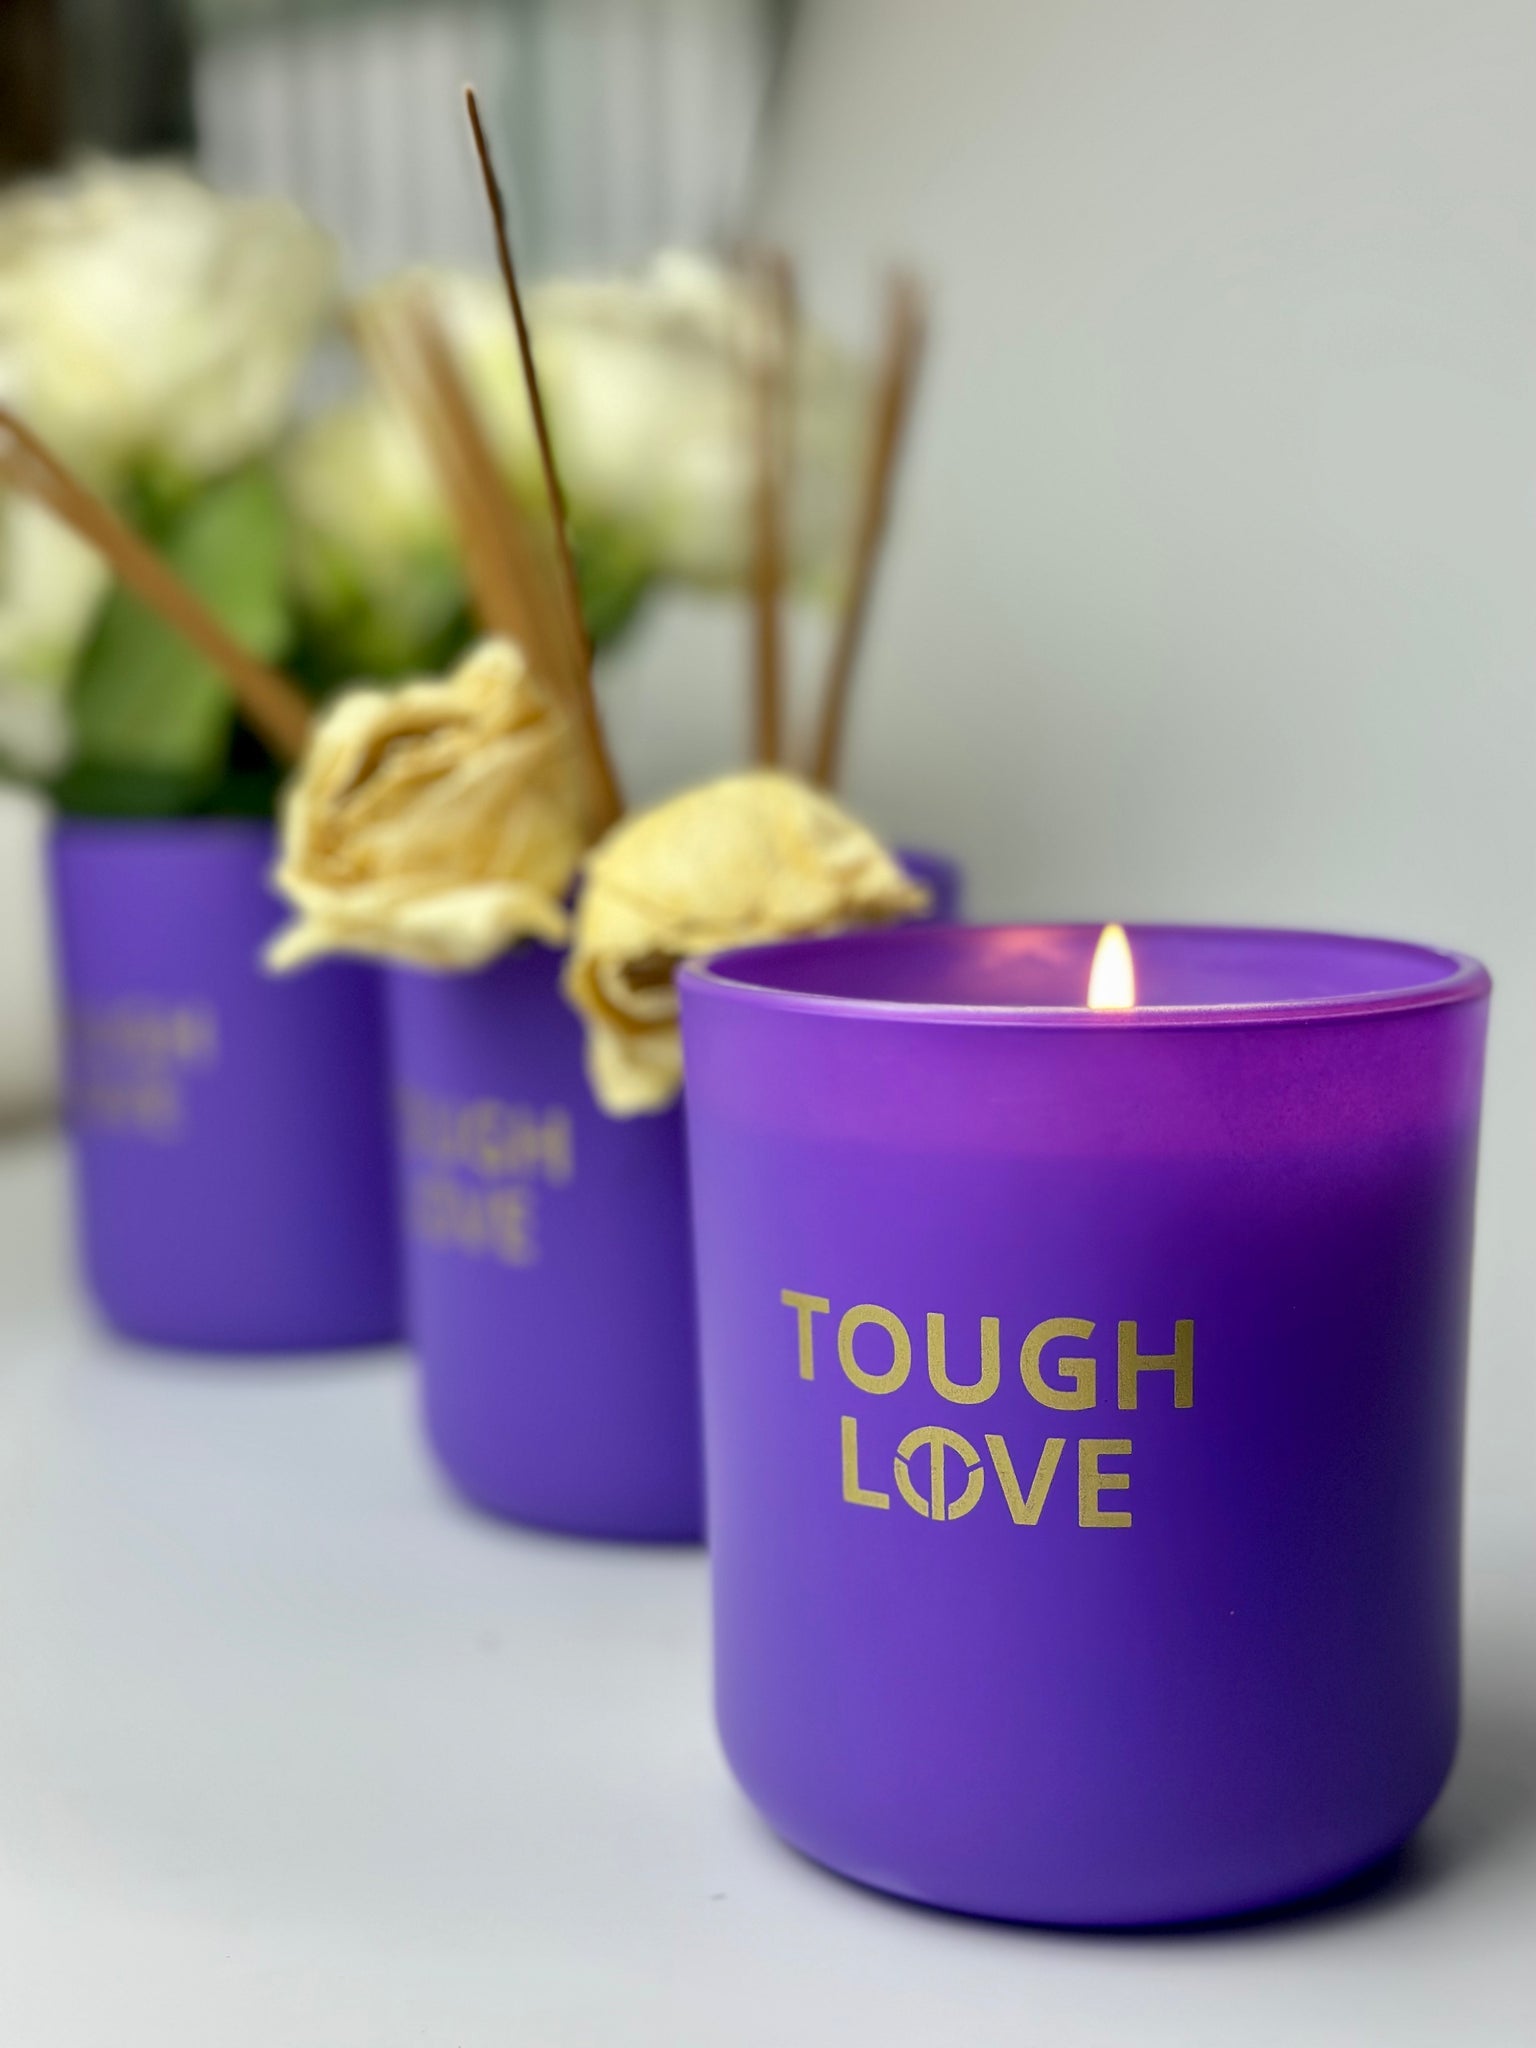 TOUGH LOVE SCENTED INTENTION CANDLE LOFT81 HOME AZLHEIMER'S AWARENESS